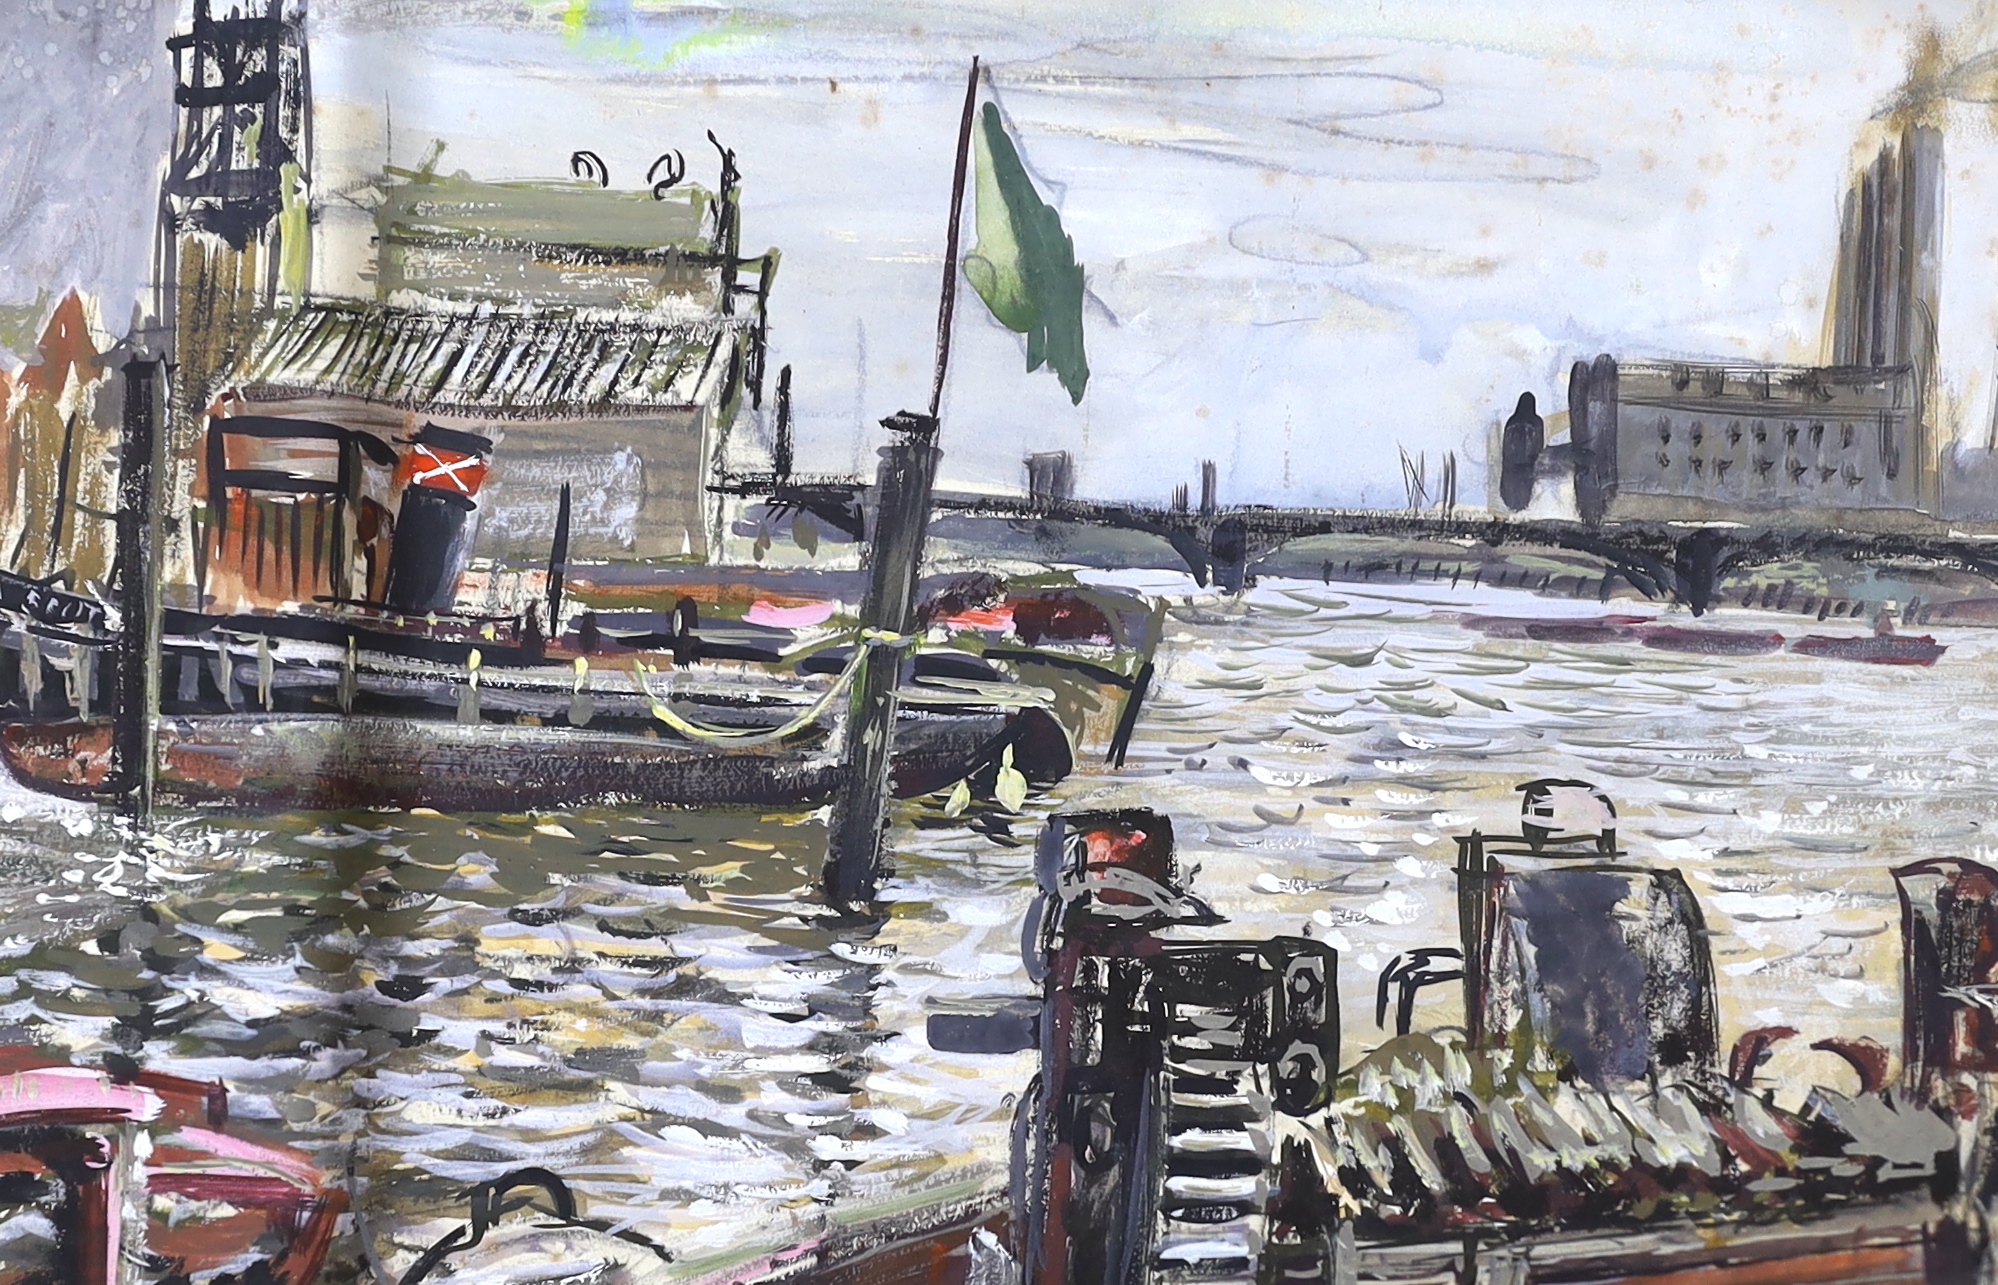 Nuala, ink and watercolour, 'Port Said', signed, 30 x 40cm, and a watercolour, English harbour scene, by another hand, 25 x 35cm